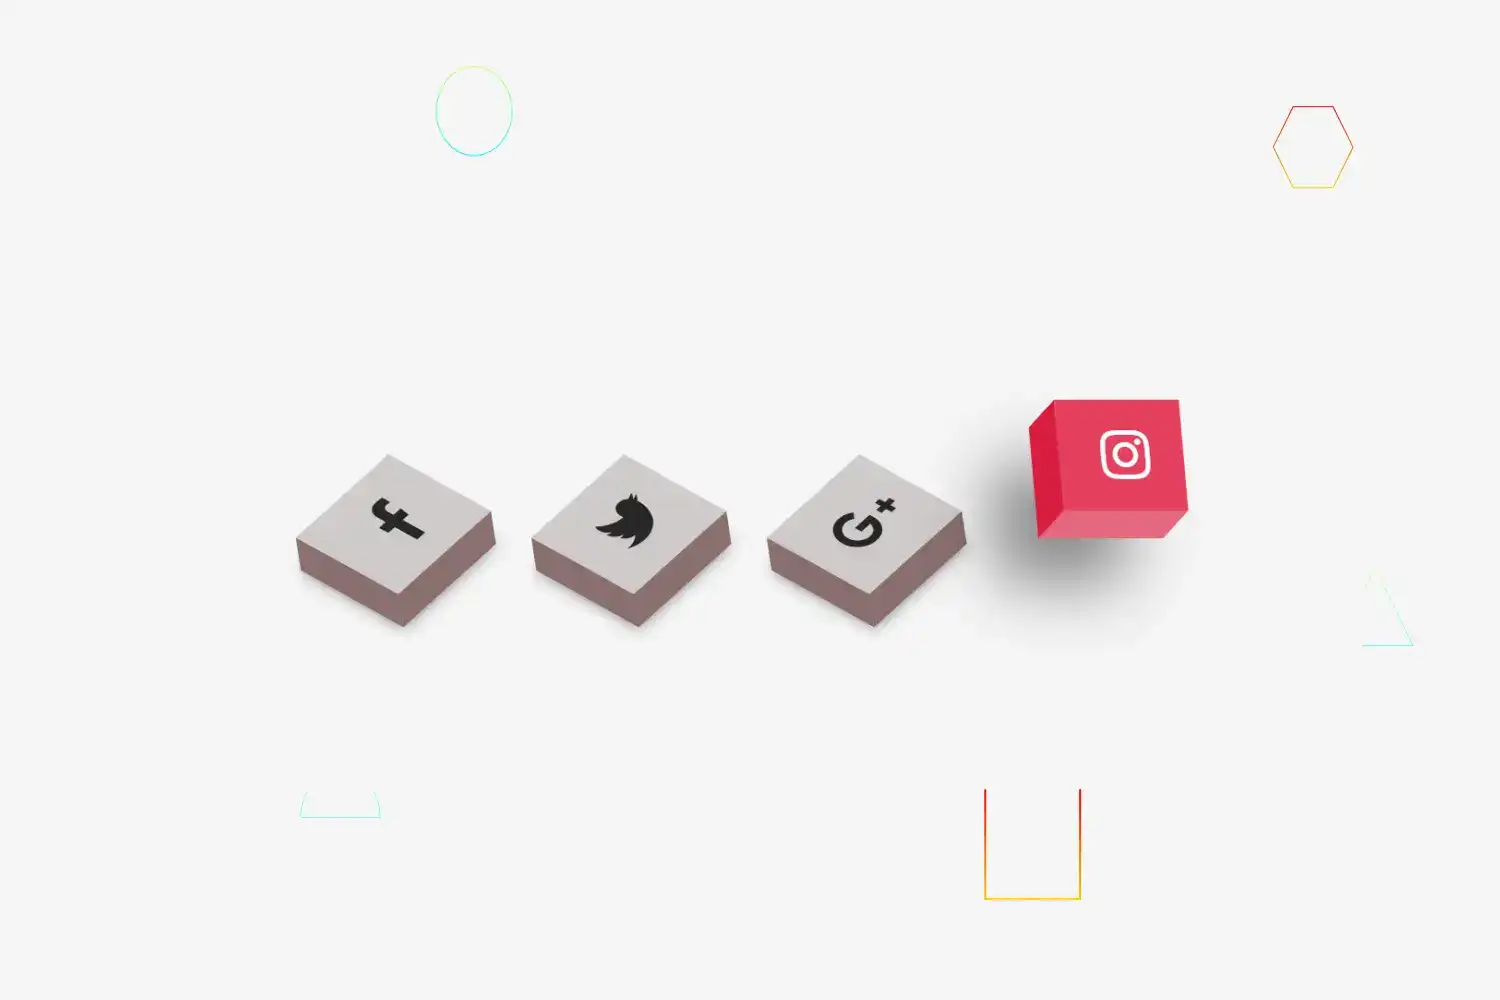 Animated 3d icons using html & css